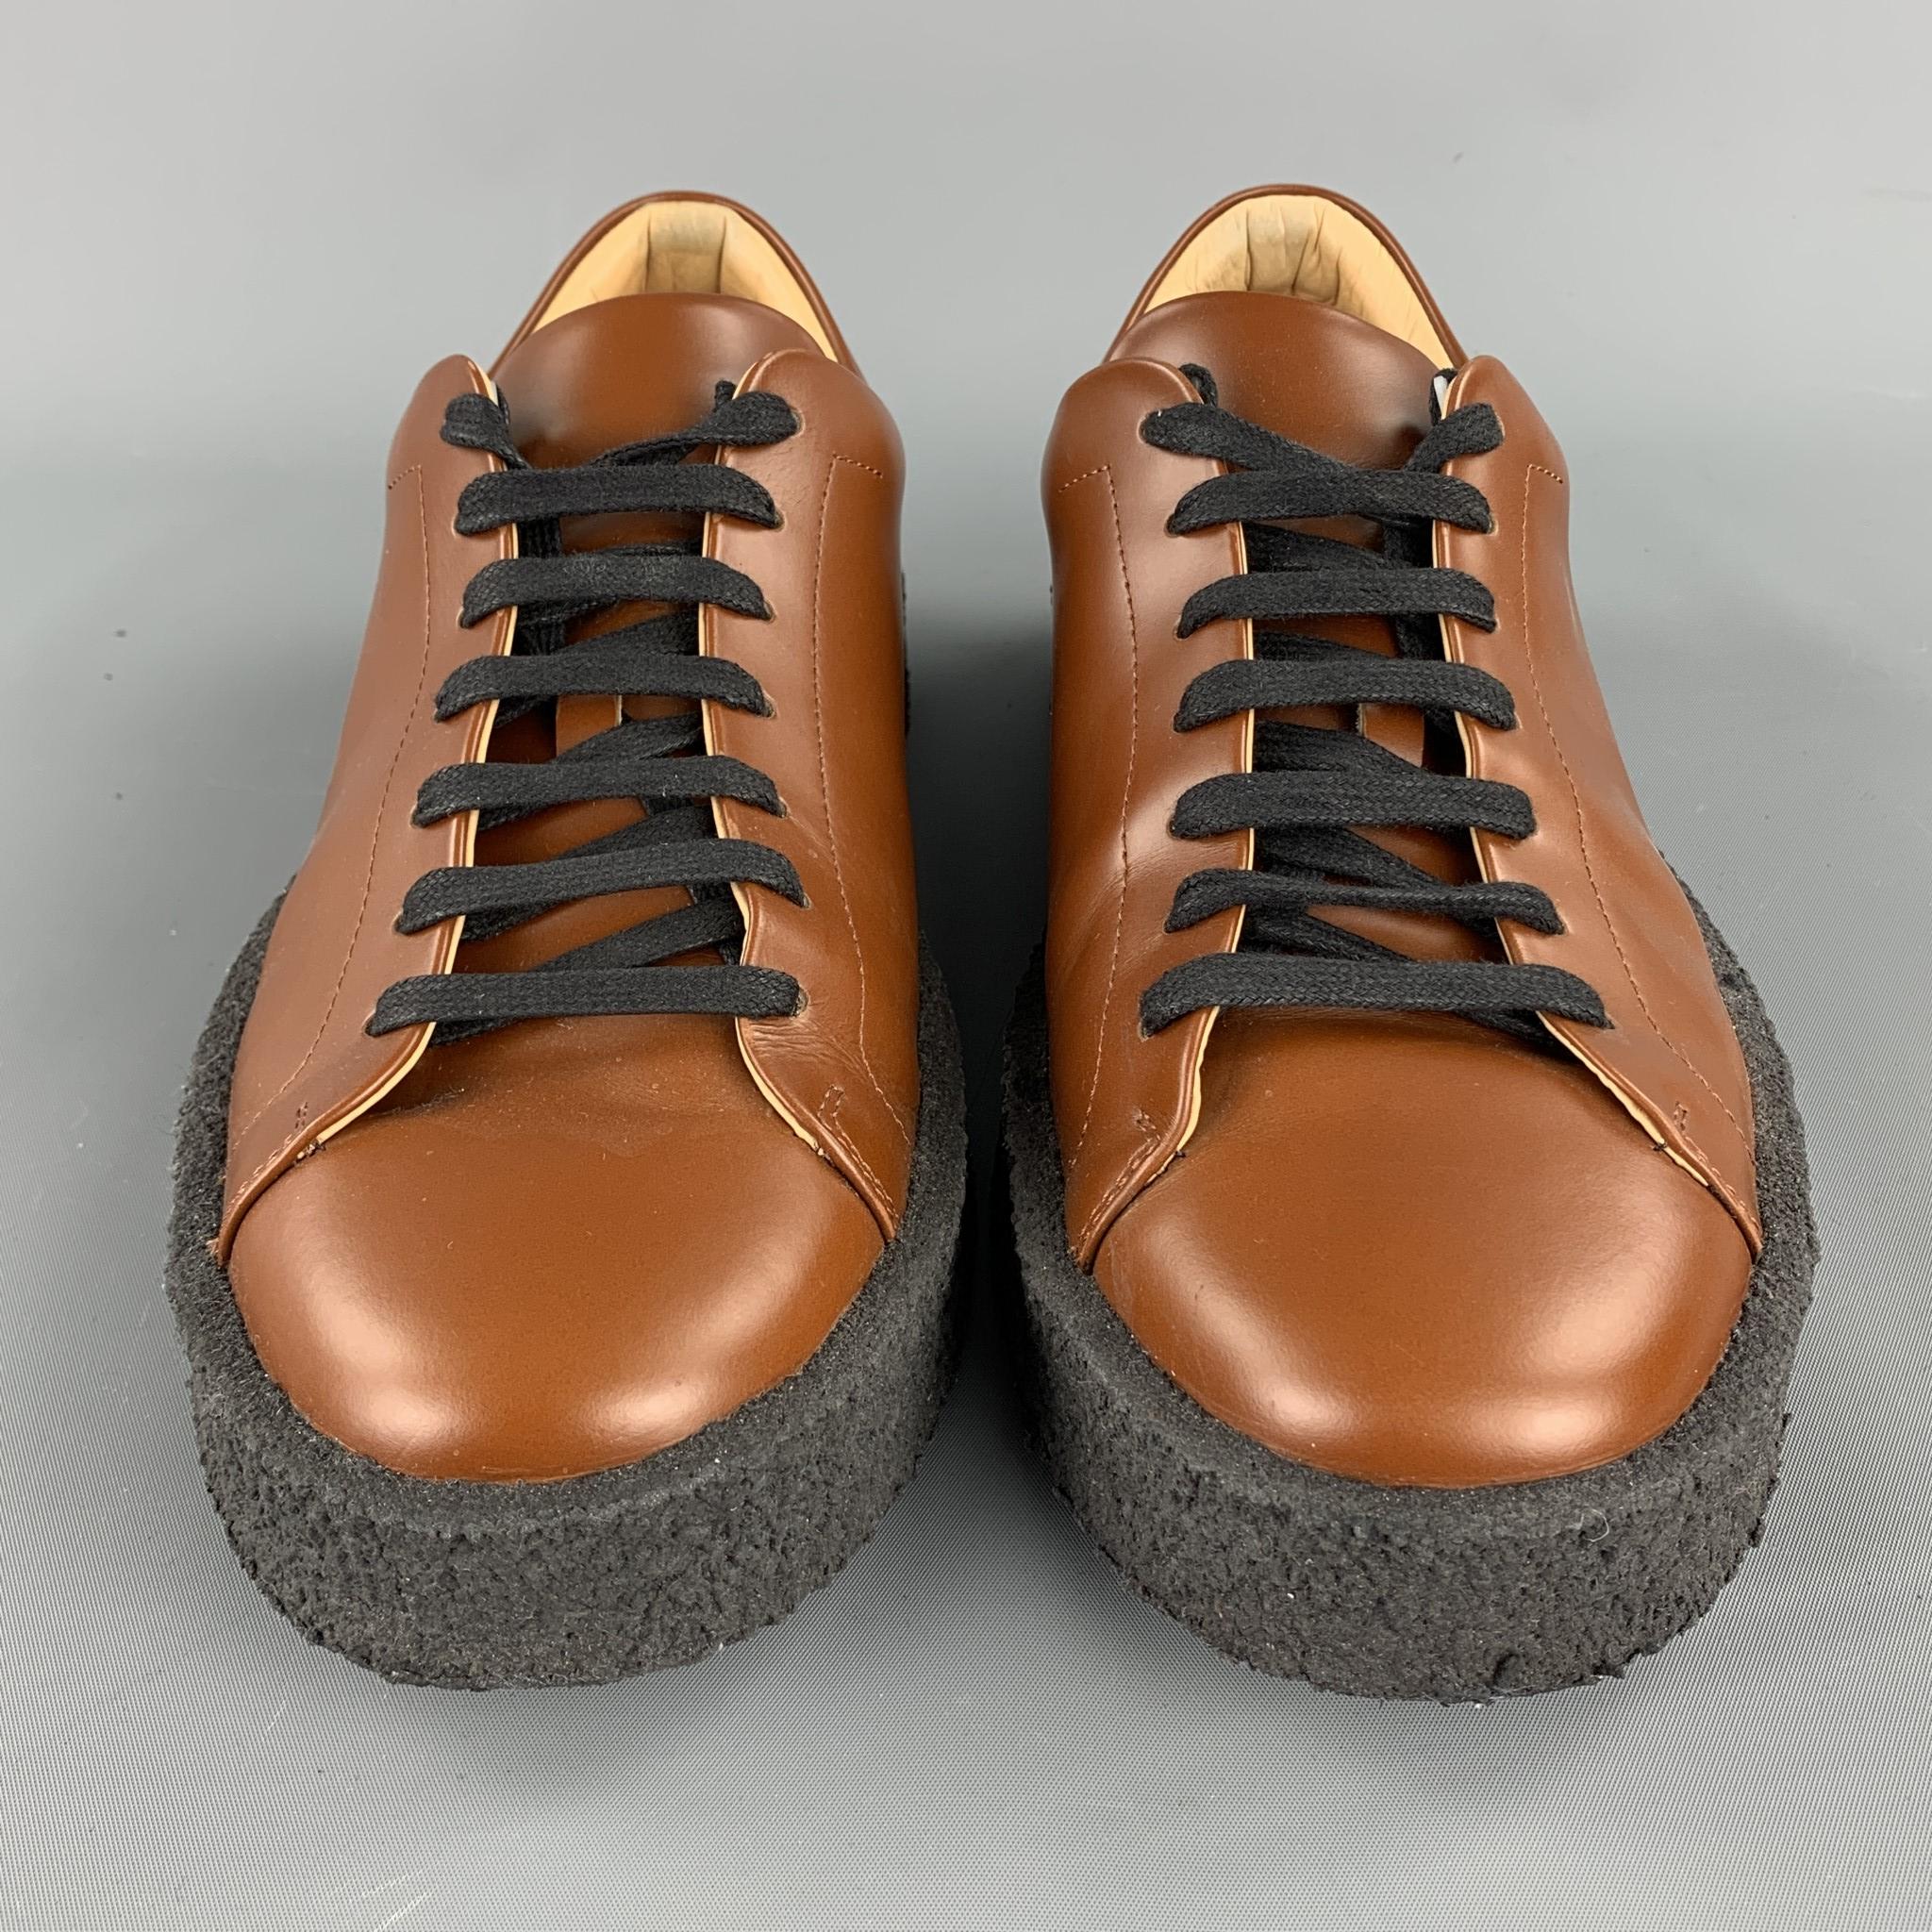 Men's JIL SANDER Size 10 Whiskey Brown Leather Rubber Sole Lace Up Shoes